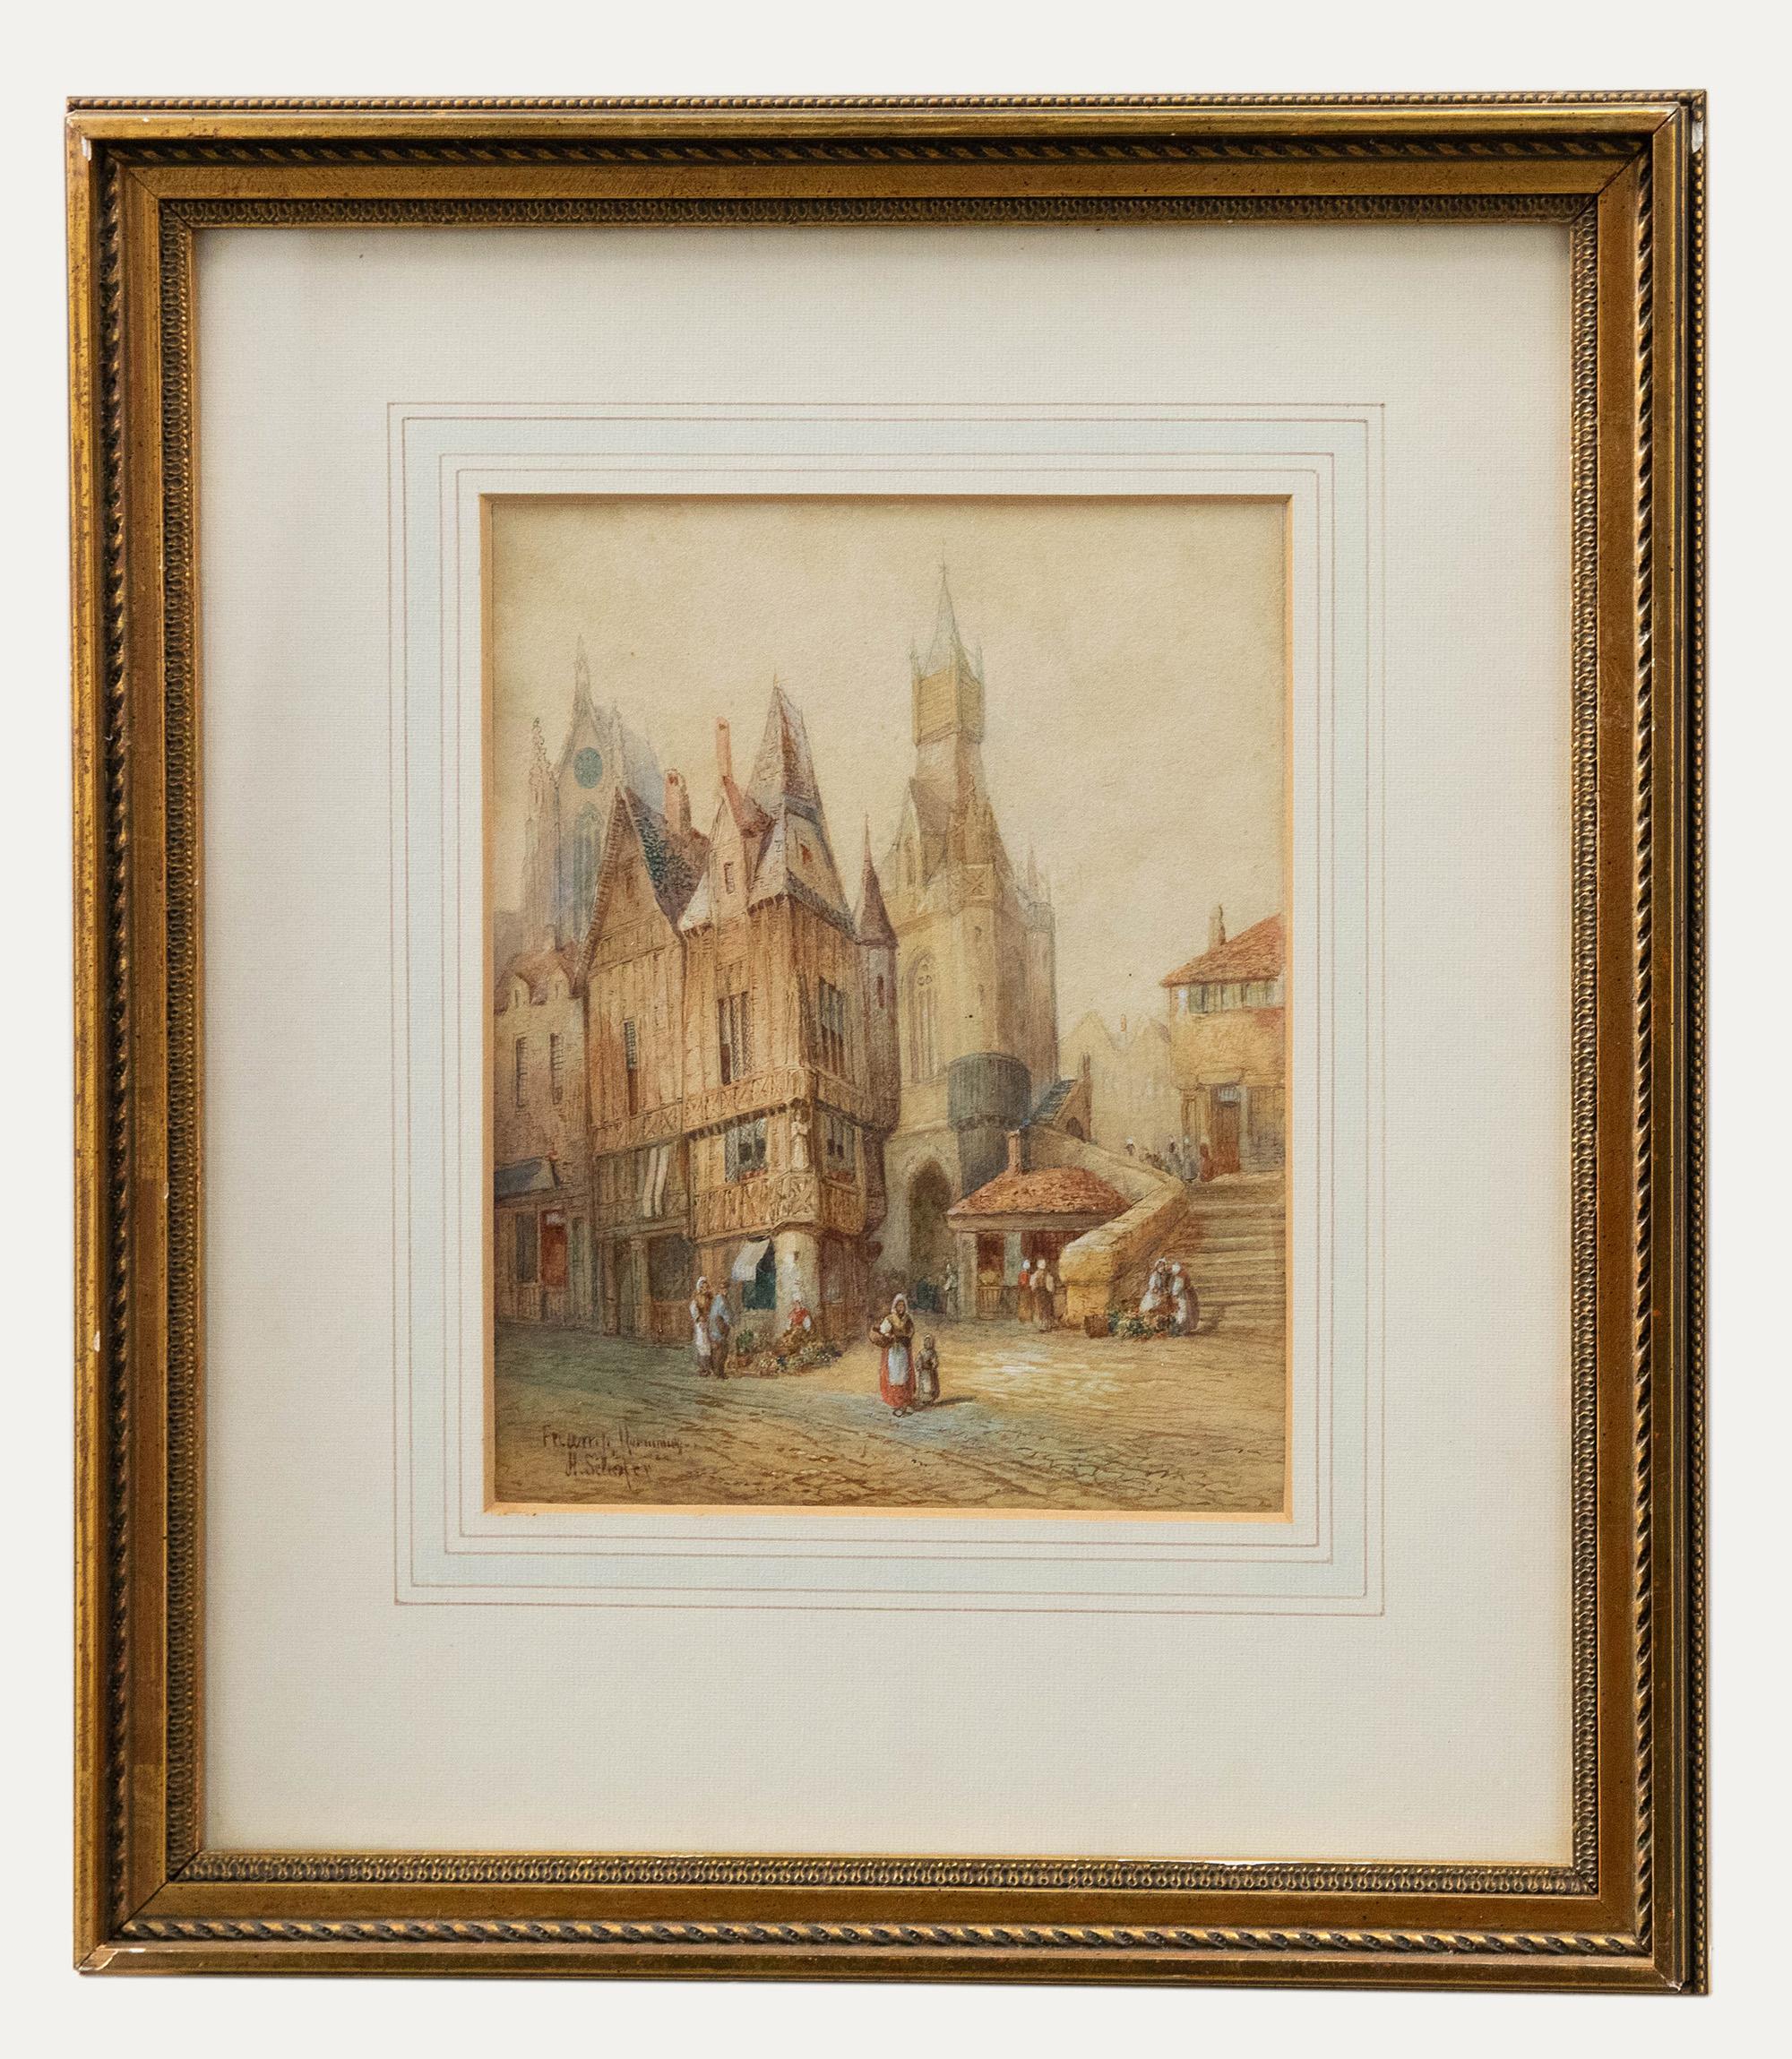 An accomplished watercolour study by the highly collectable artist Henry Schafer. Signed and titled to the lower right. Presented in a gilt frame with a ribbon and stick running pattern. On paper.